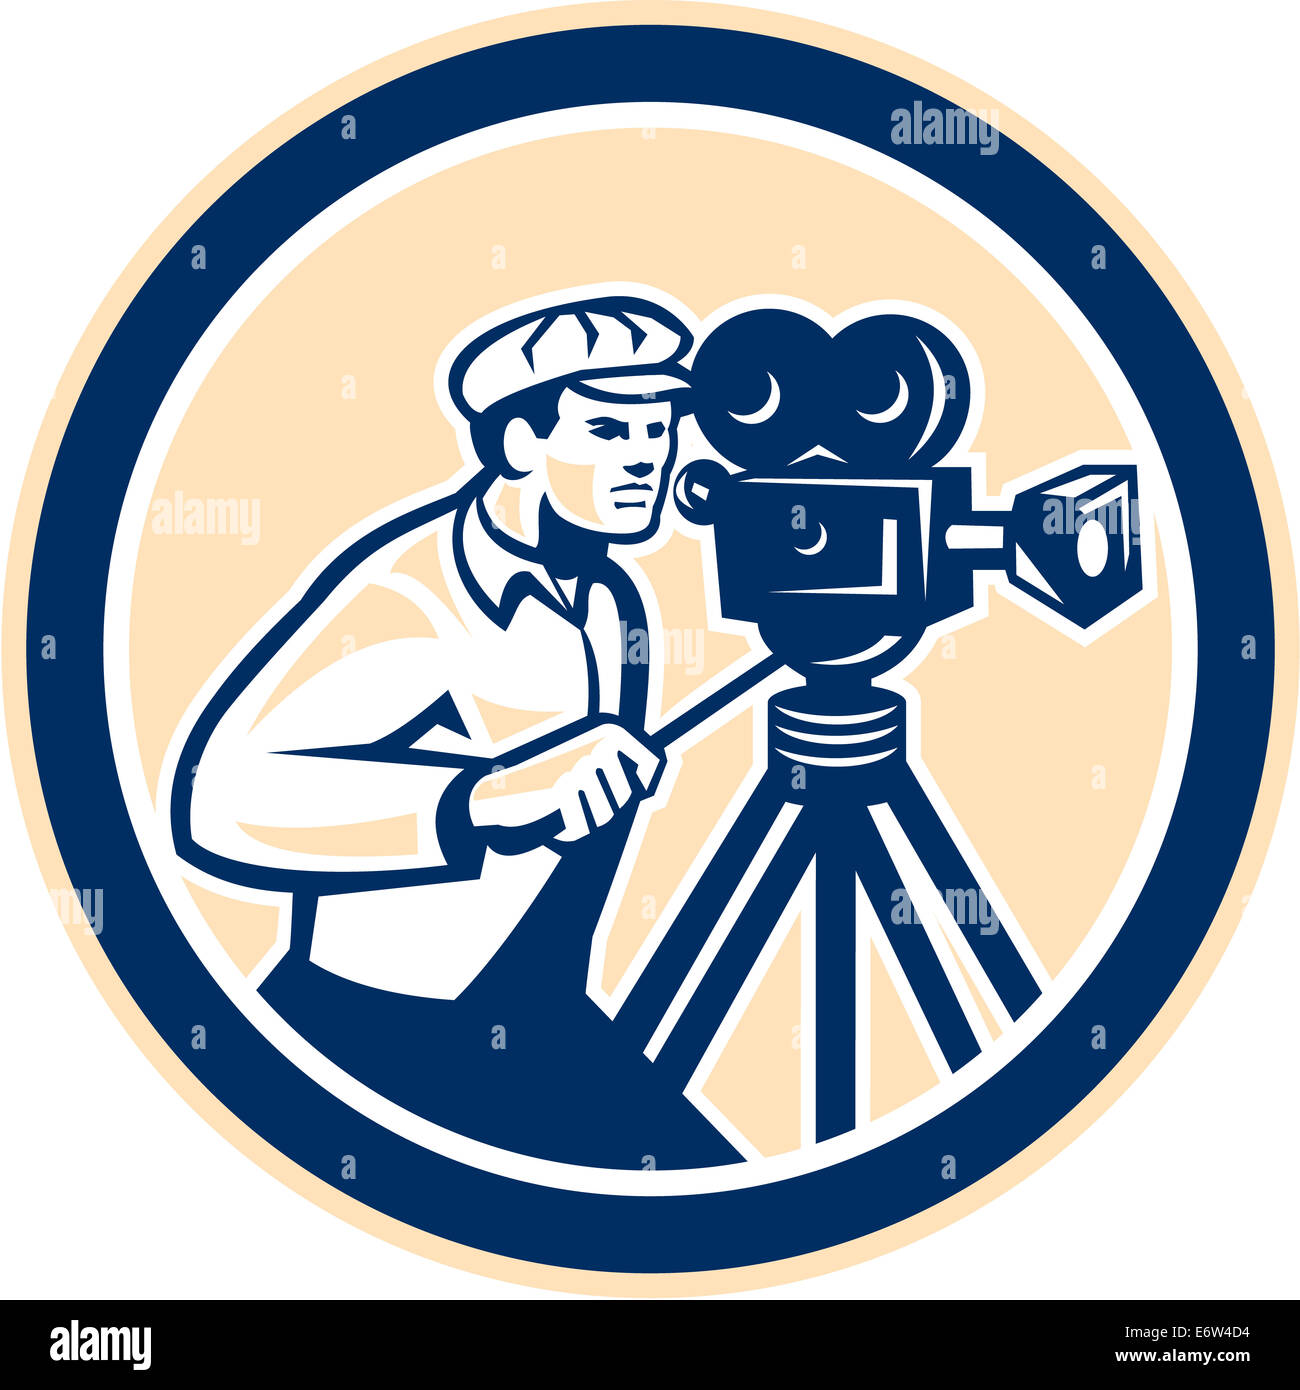 Illustration of a cameraman movie director with vintage movie film camera viewed from the side set inside circle on isolated background done in retro style. Stock Photo